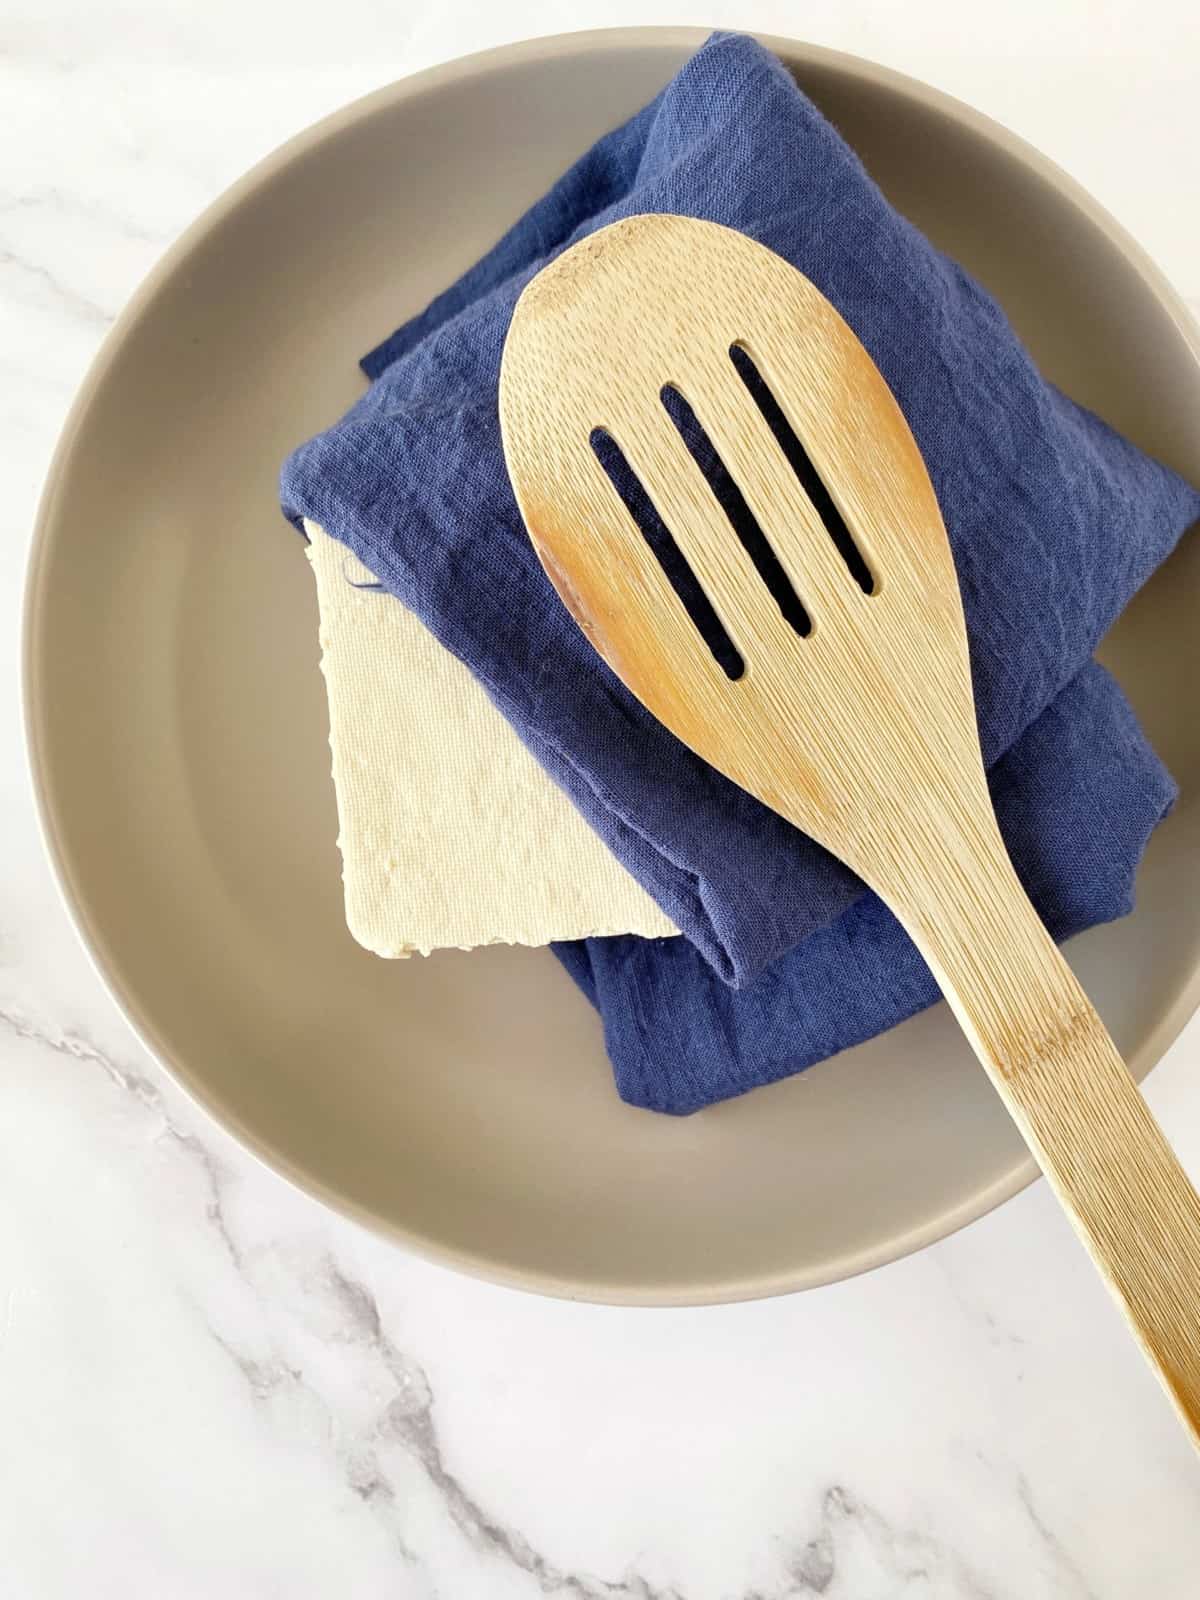 wooden spatula on top of a towel and under is a block of tofu 